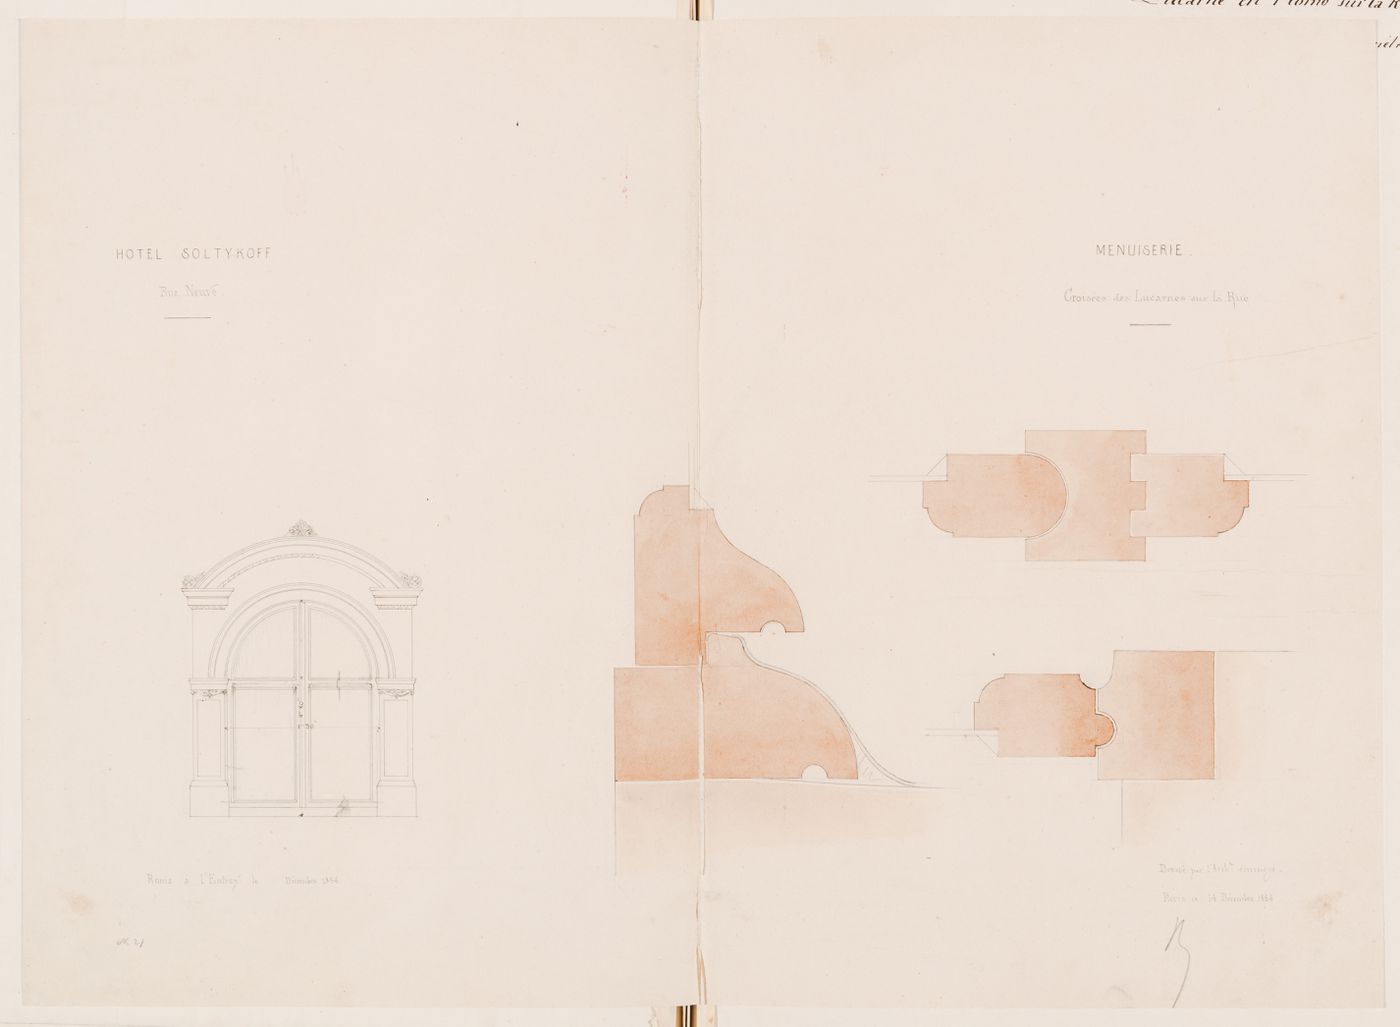 Elevation and joinery details for the dormer windows for the principal façade, Hôtel Soltykoff